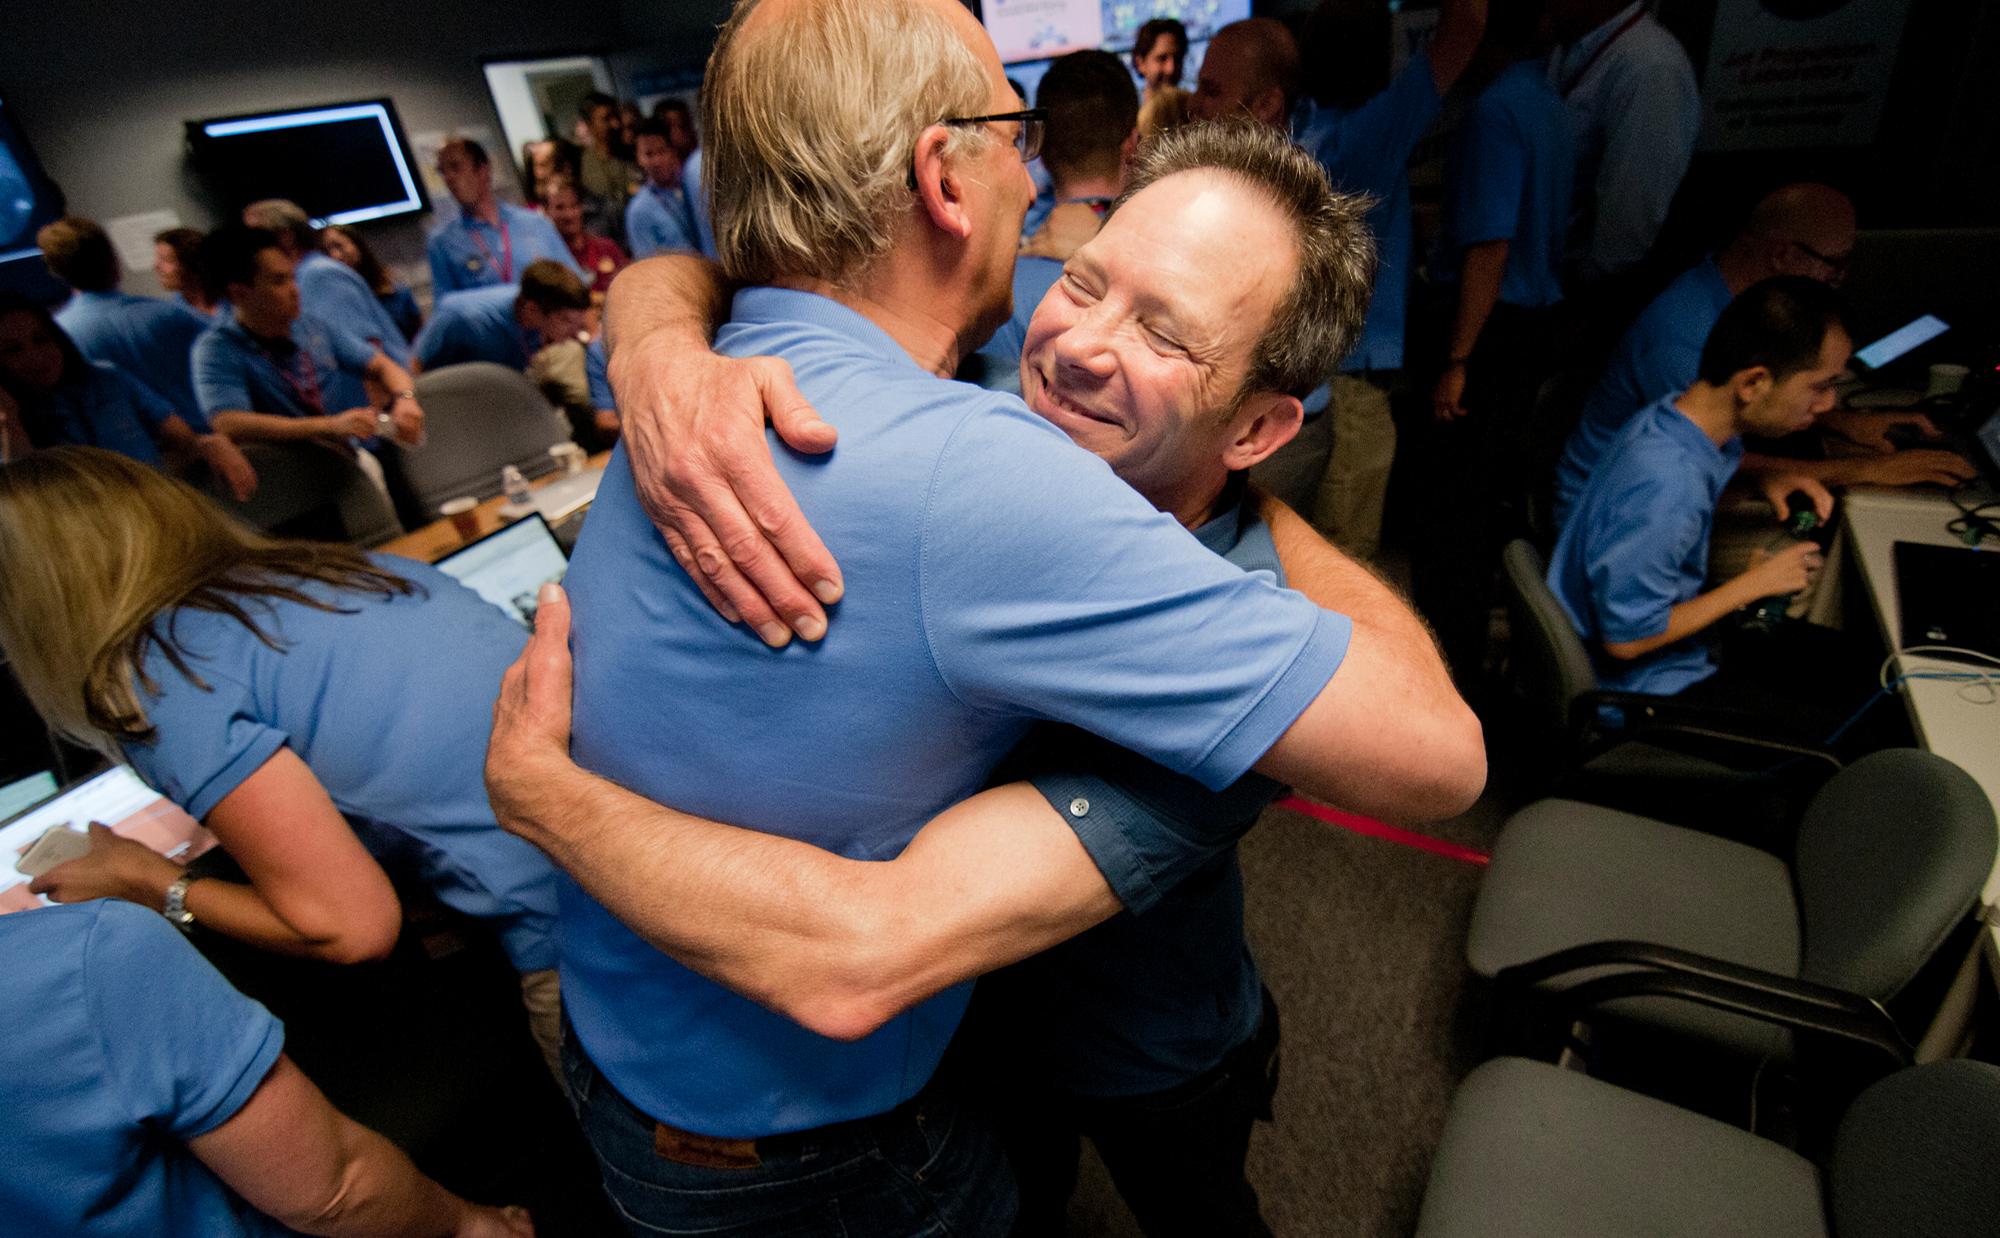 The Entry, Descent and Landing team celebrate just moments after news that Curiosity landed safely on Mars.